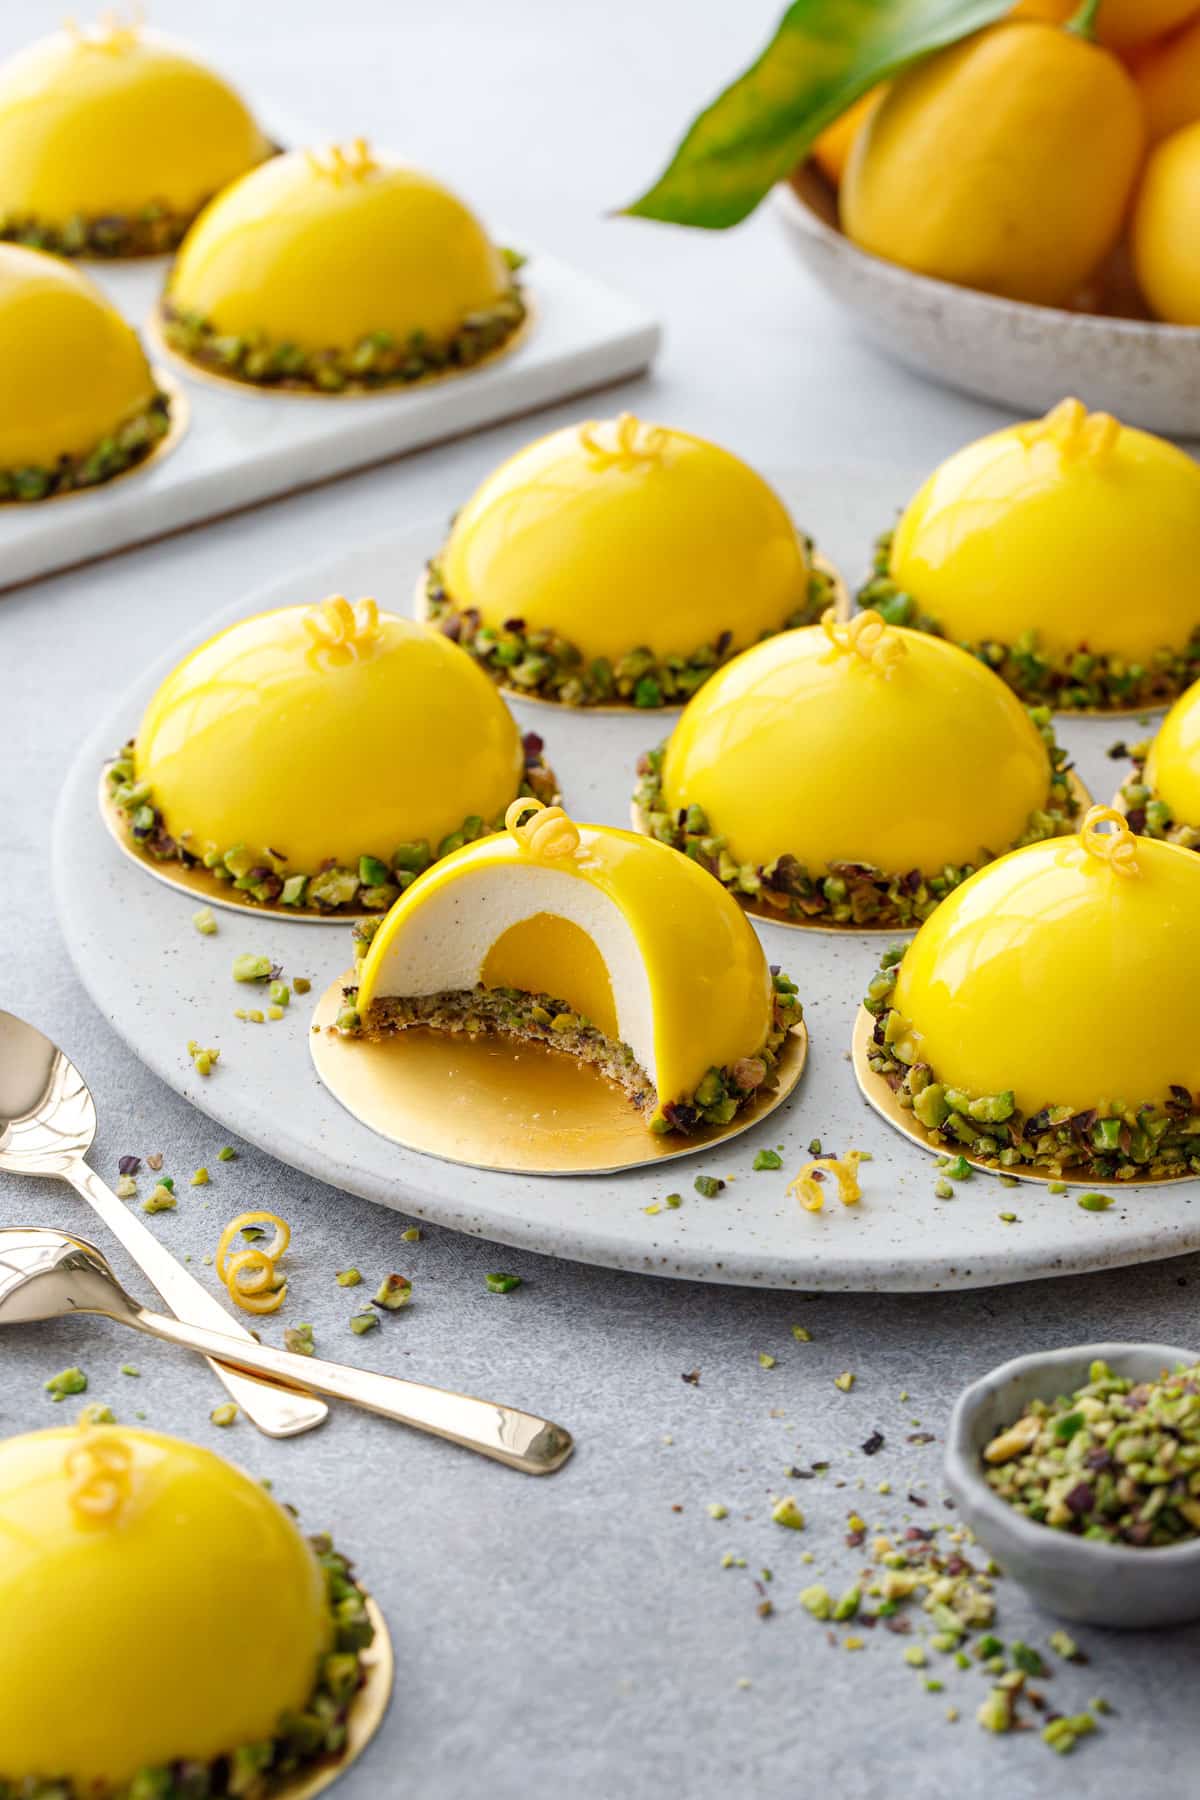 Round plate with bright yellow dome-shaped mousse cakes, one cut to show the layers inside; gold spoons and bowl of lemons in the background.